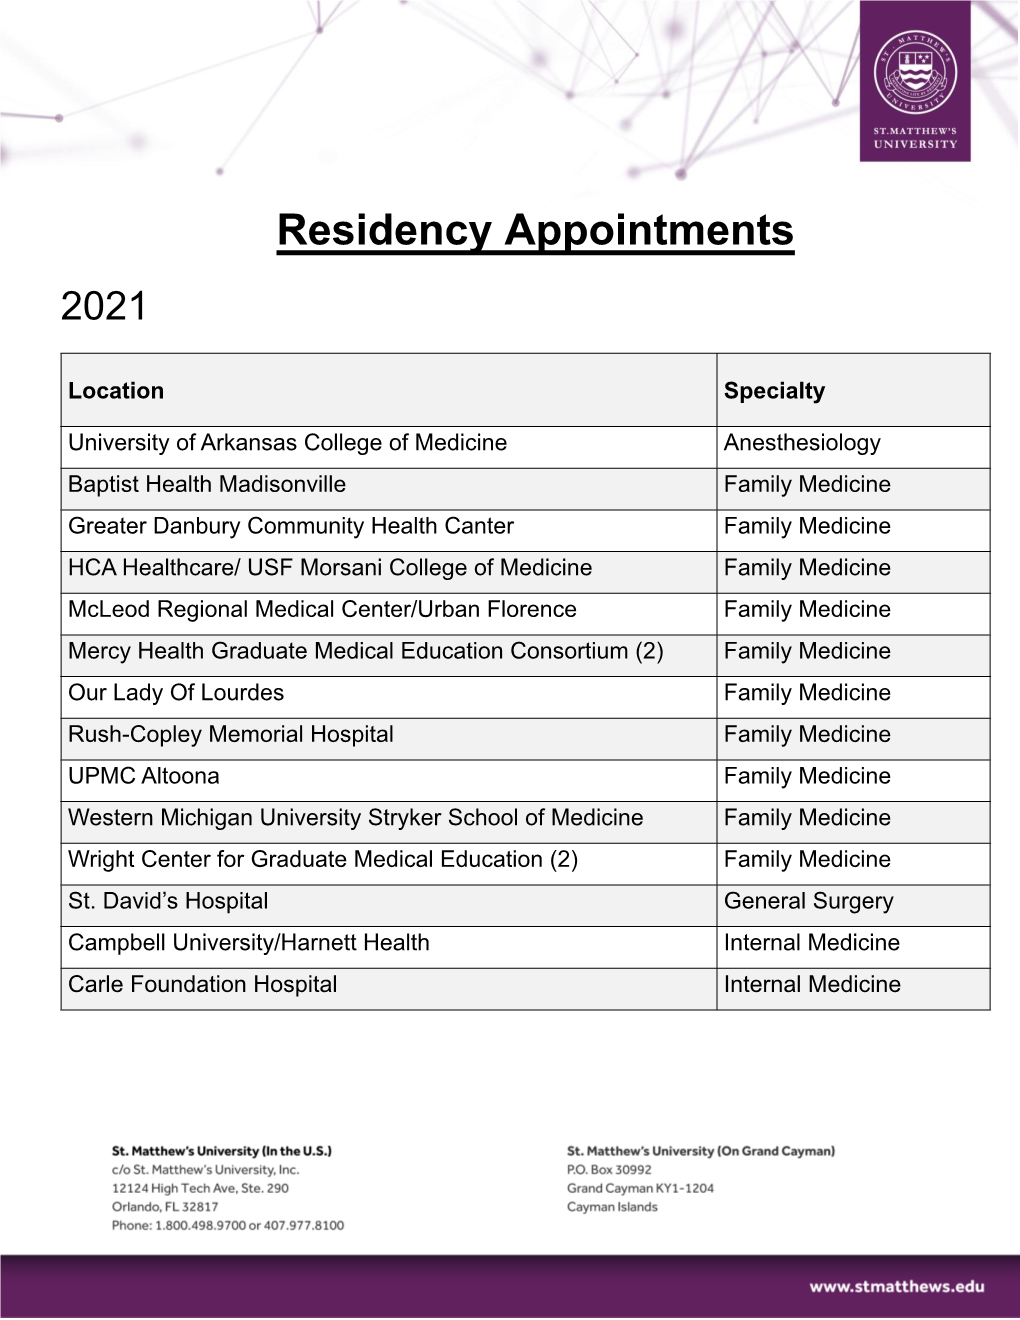 Residency Appointments 2021